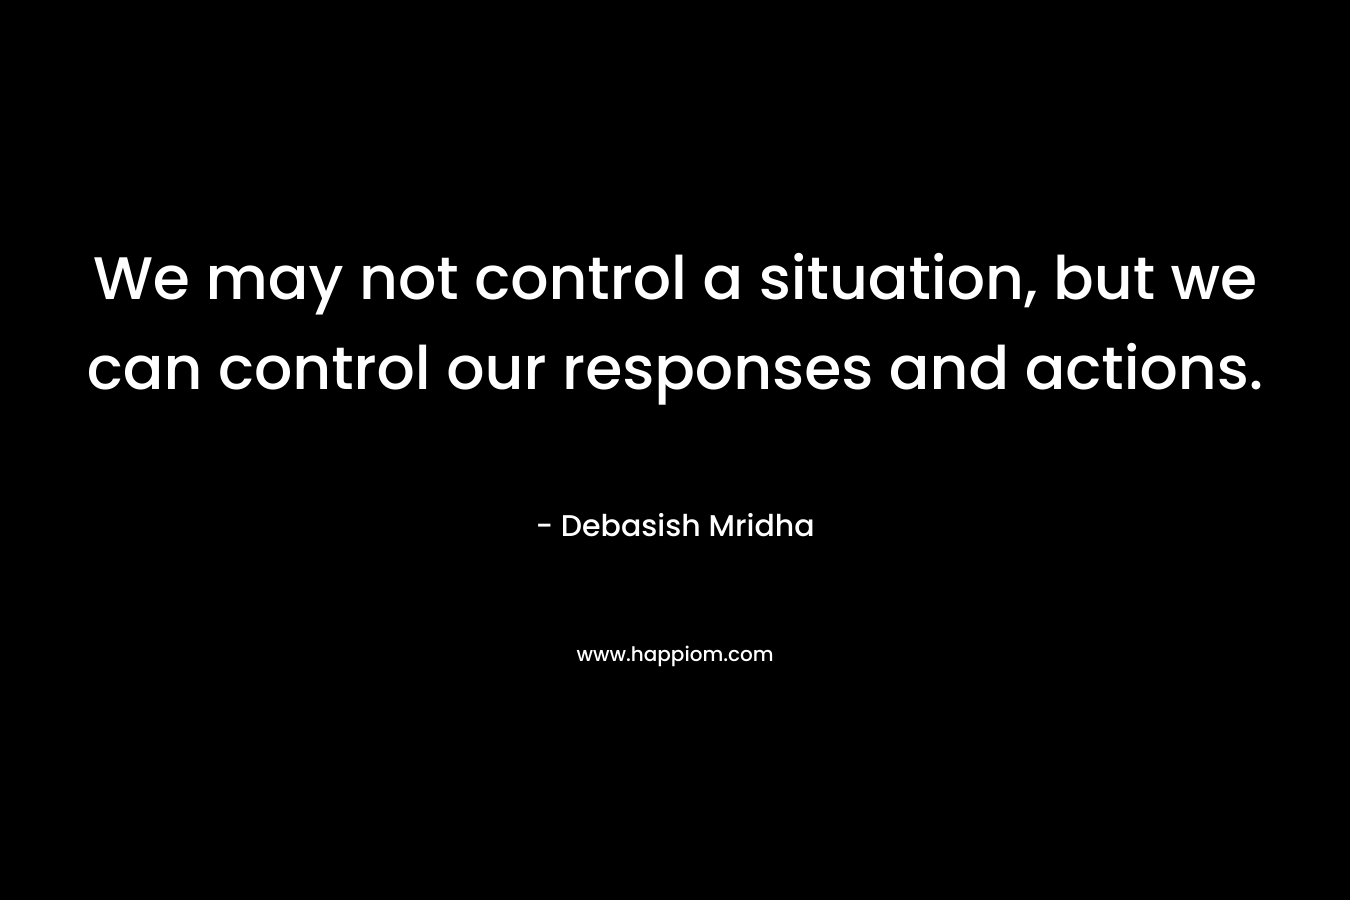 We may not control a situation, but we can control our responses and actions. – Debasish Mridha